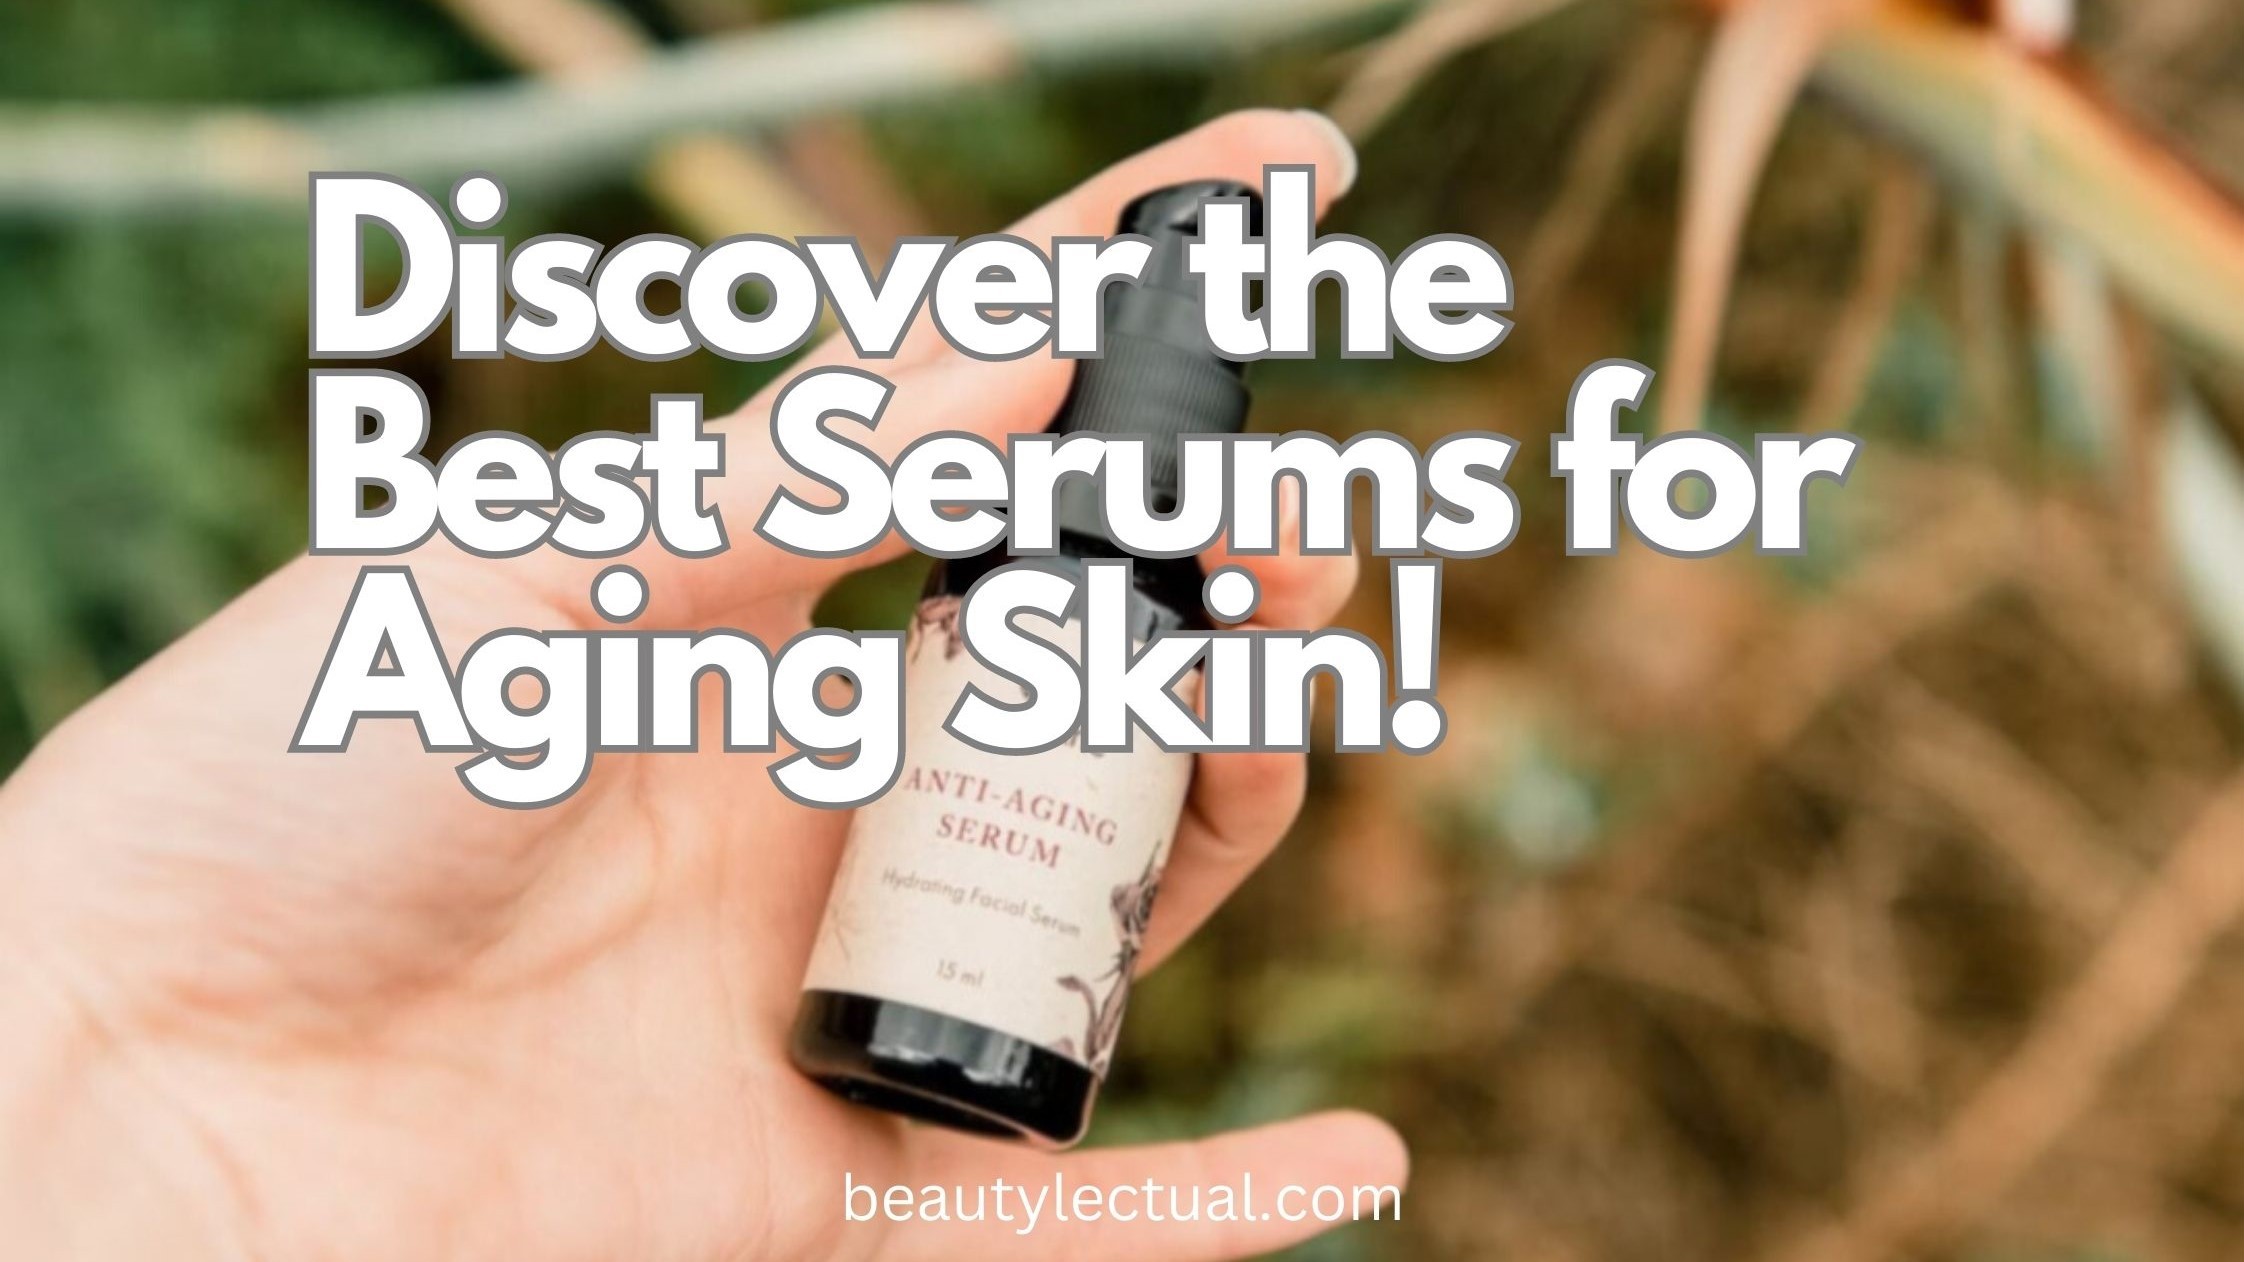 Best Serums for Aging Skin